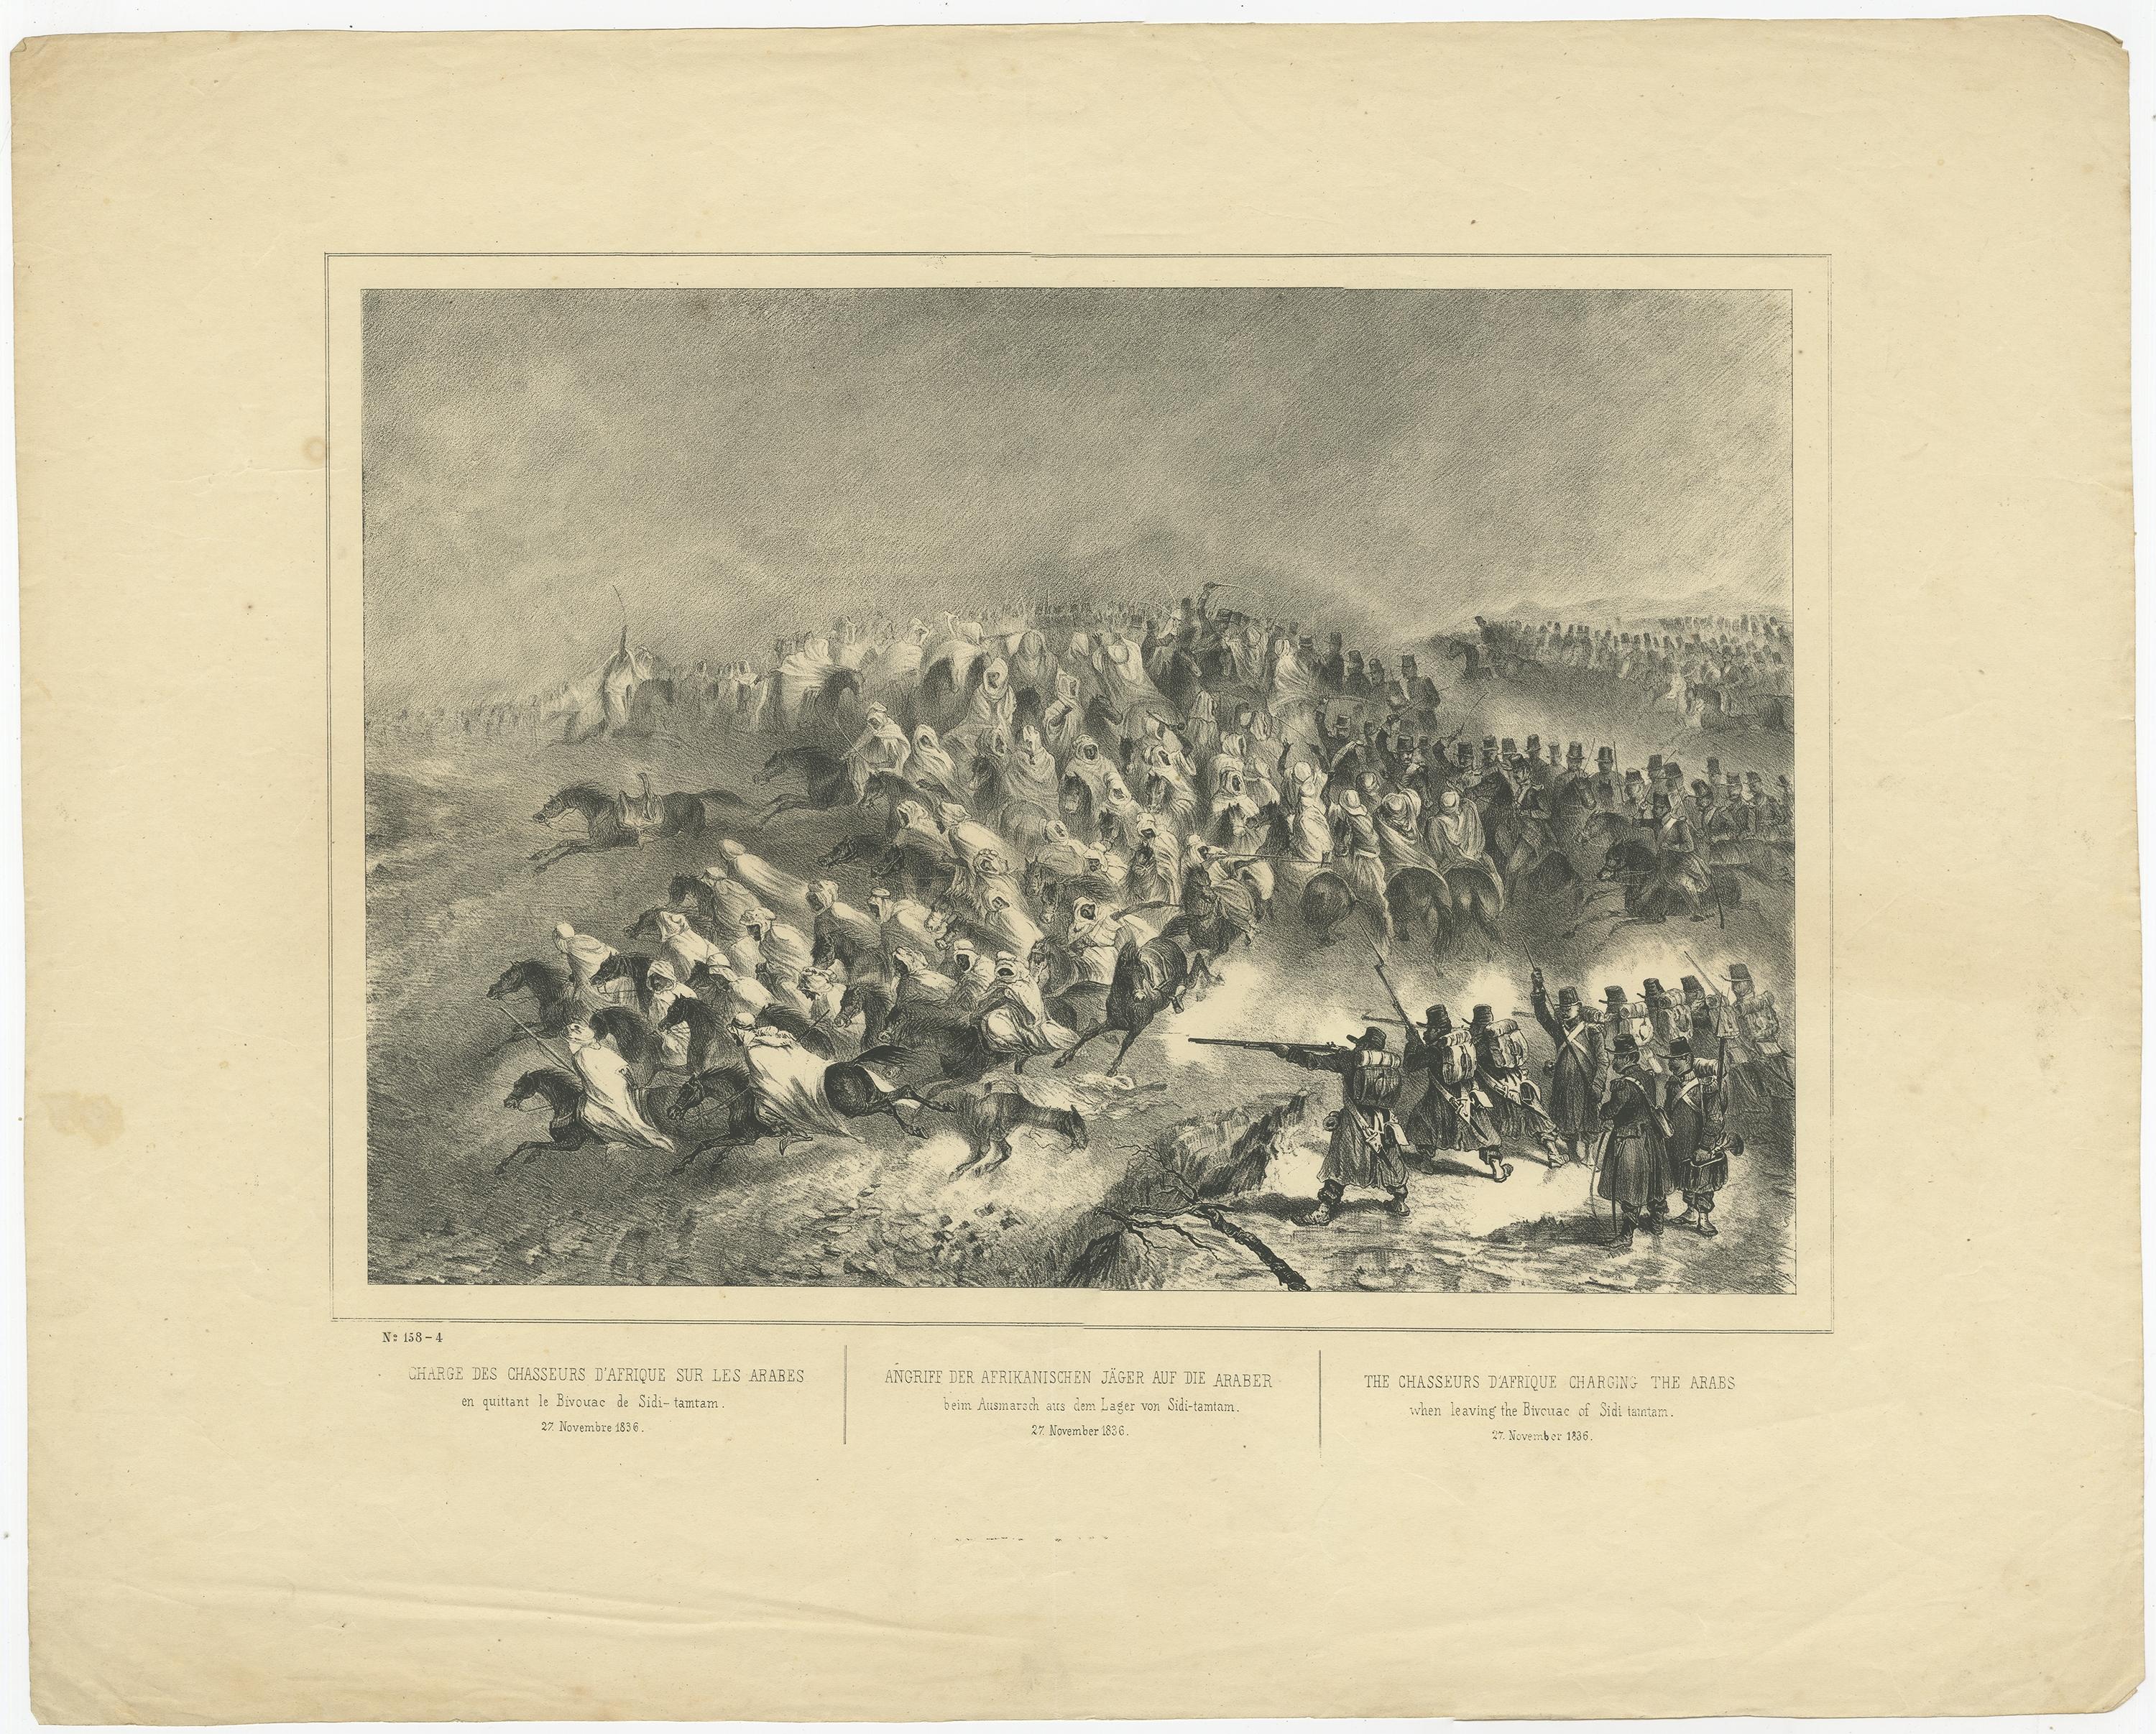 Antique print titled 'Charge des Chasseurs d'Afrique sur les Arabes (..)'. 

Original lithograph of the Chasseurs d'Afrique charging the Arabs when leaving the Bivouac of Sidi tamtam (27 November 1836). No. 158-4 of a series on the conflicts in